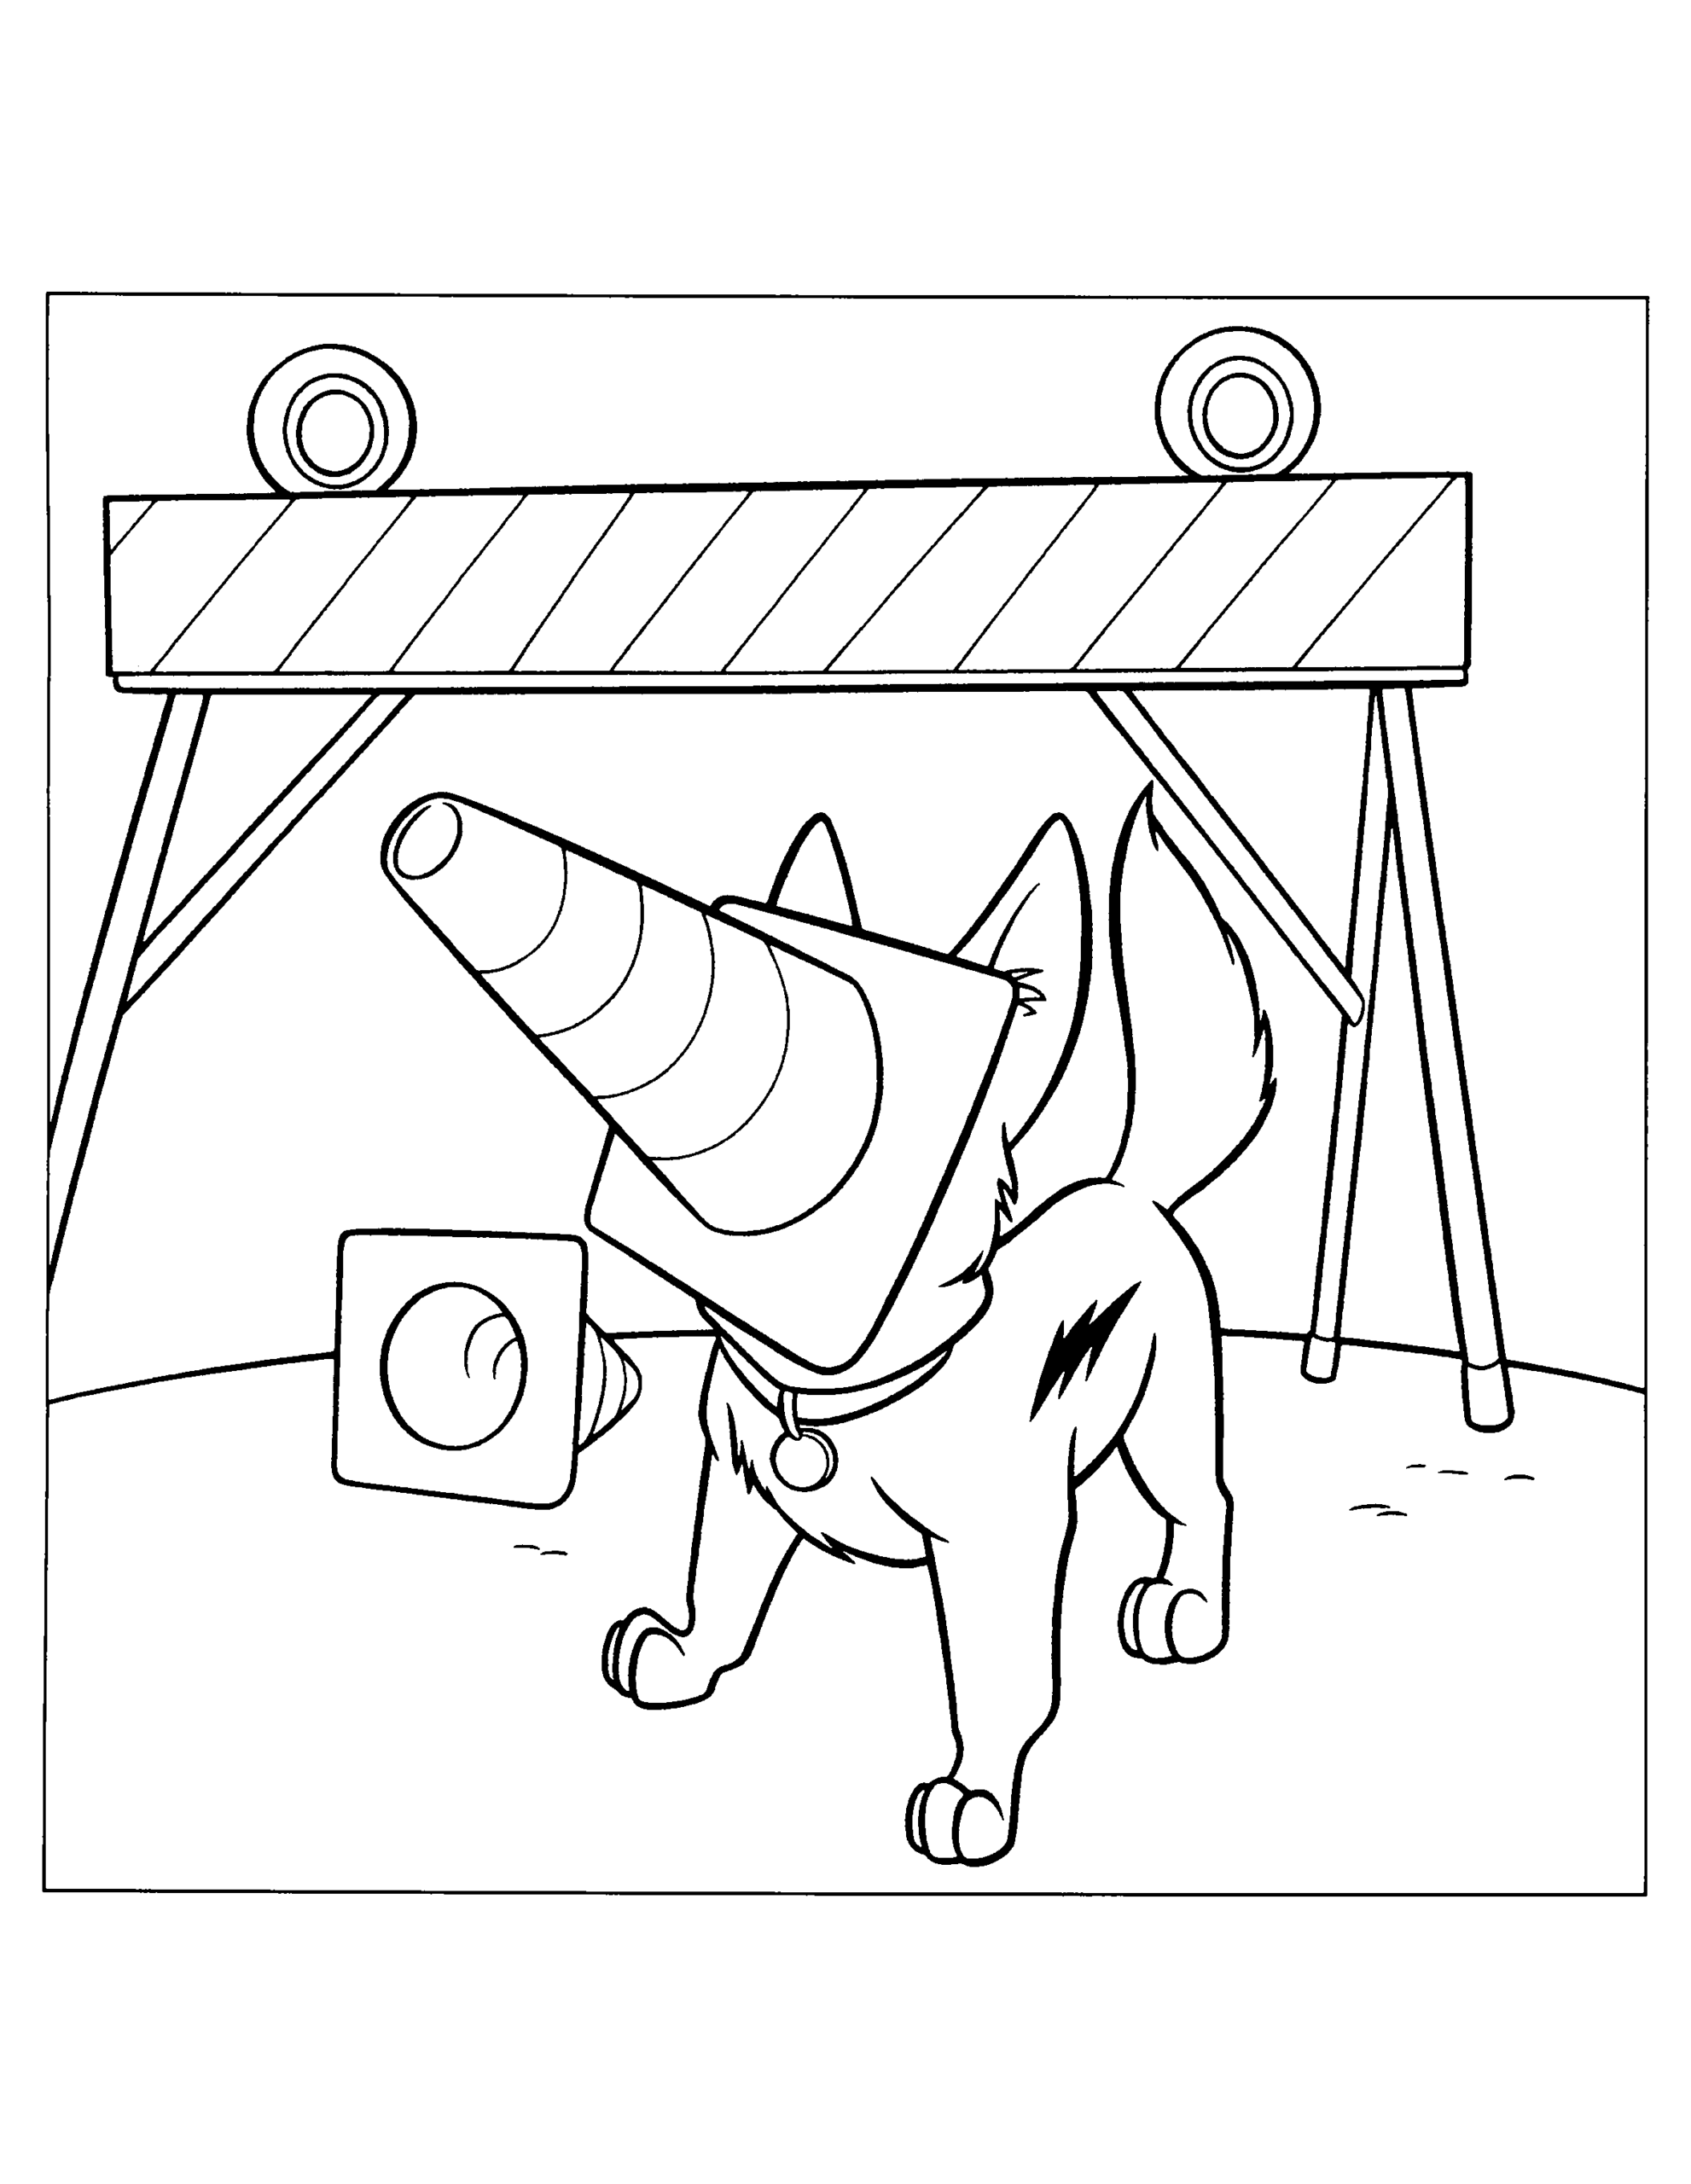 Bolt Coloring Pages TV Film bolt YBCm1 Printable 2020 01210 Coloring4free